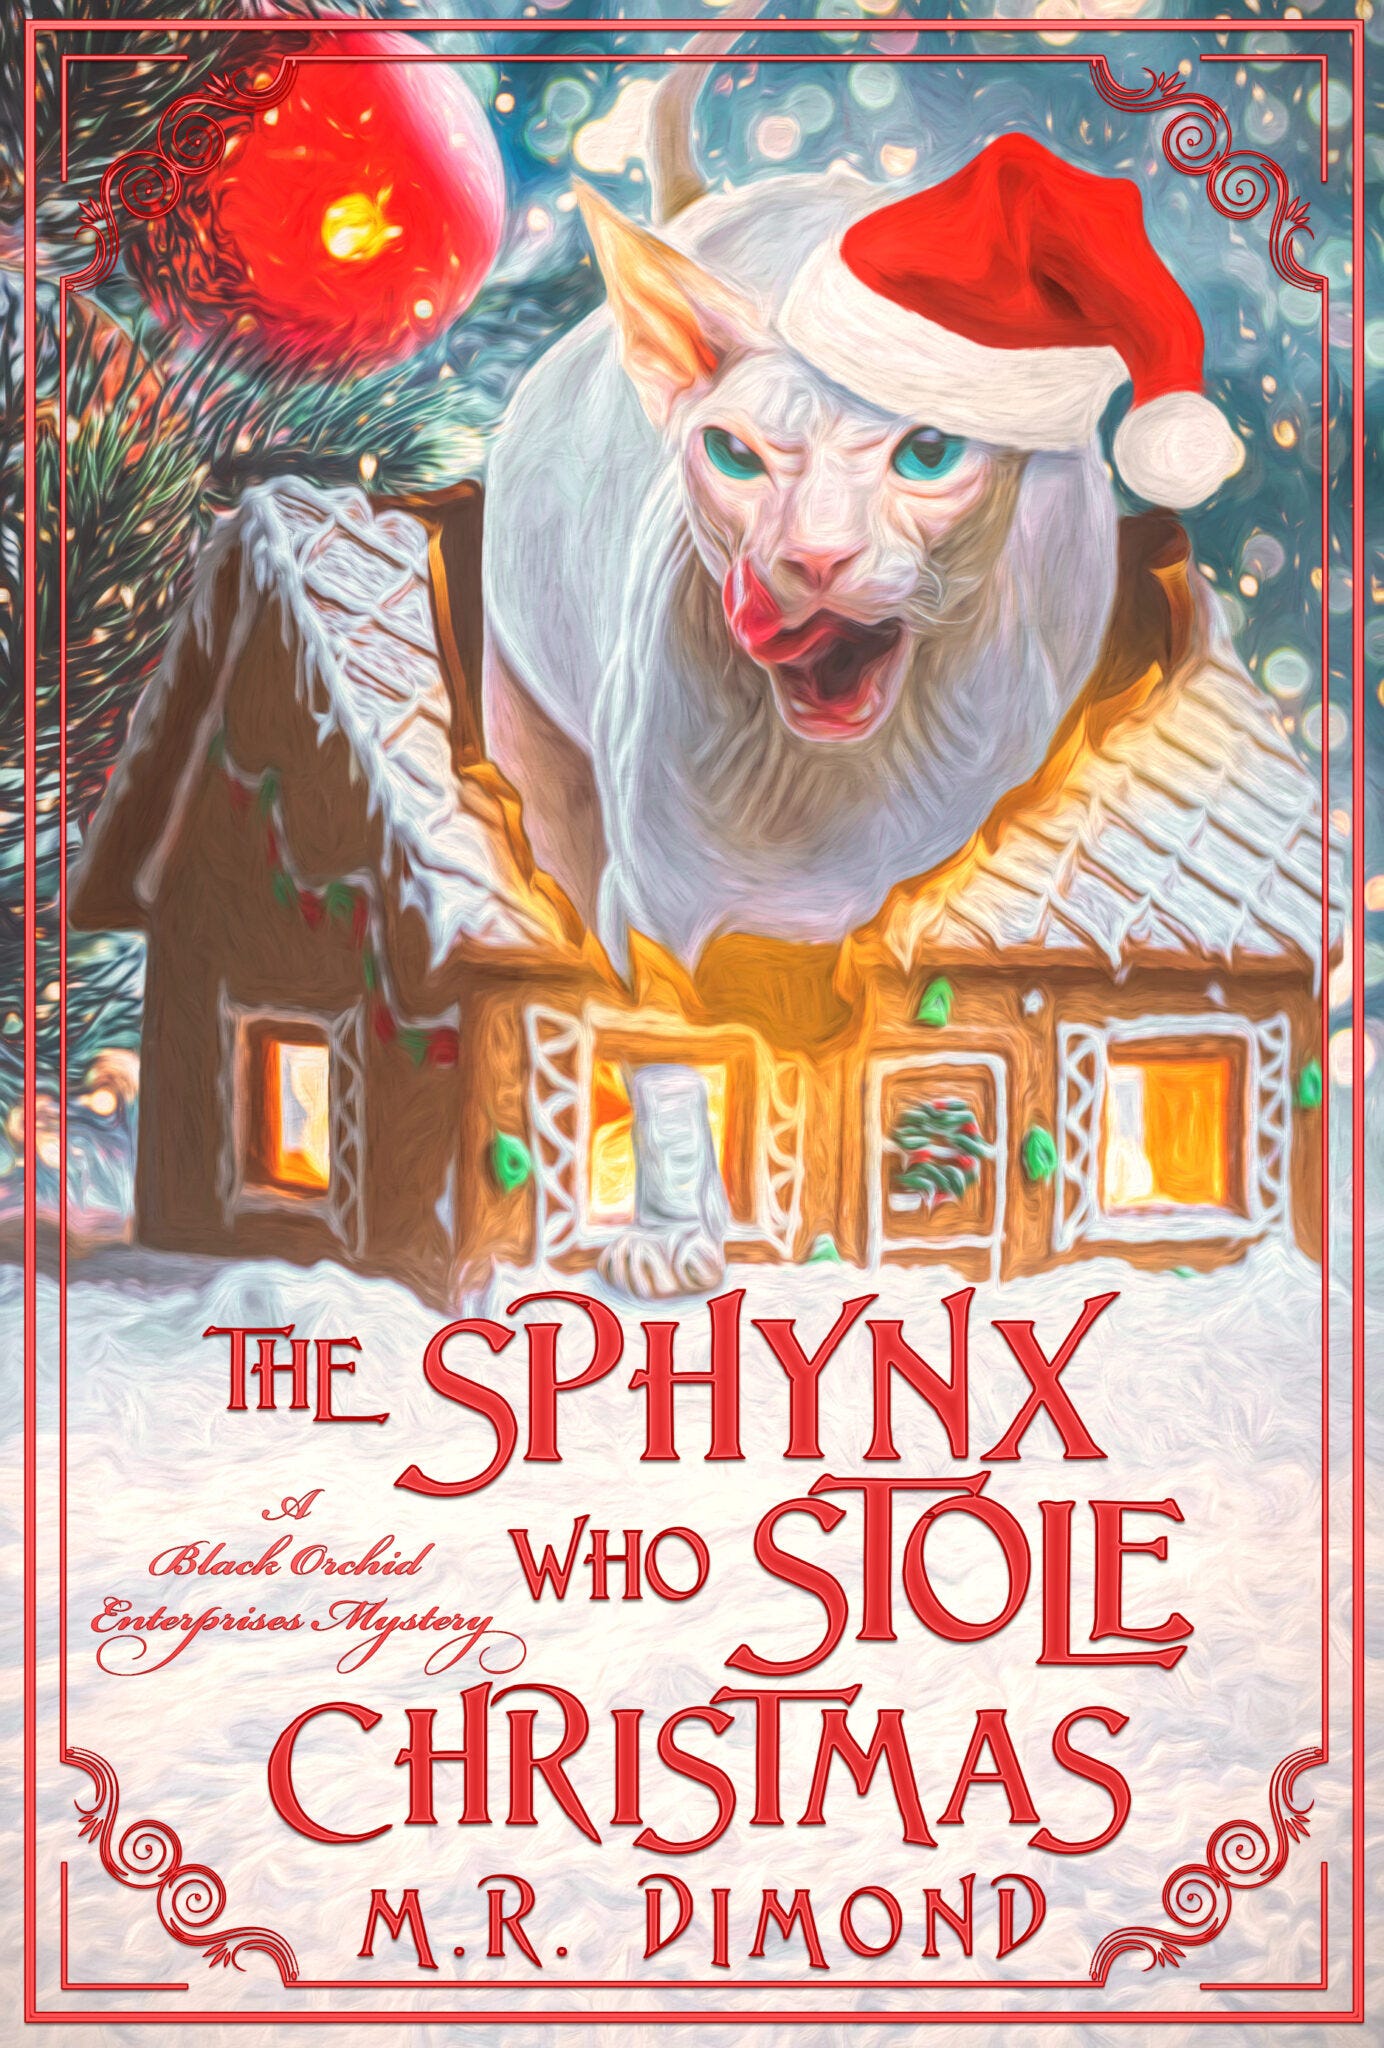 A terrifying cat in a santa hat on a gingerbread house: The Sphynx Who Stole Christmas